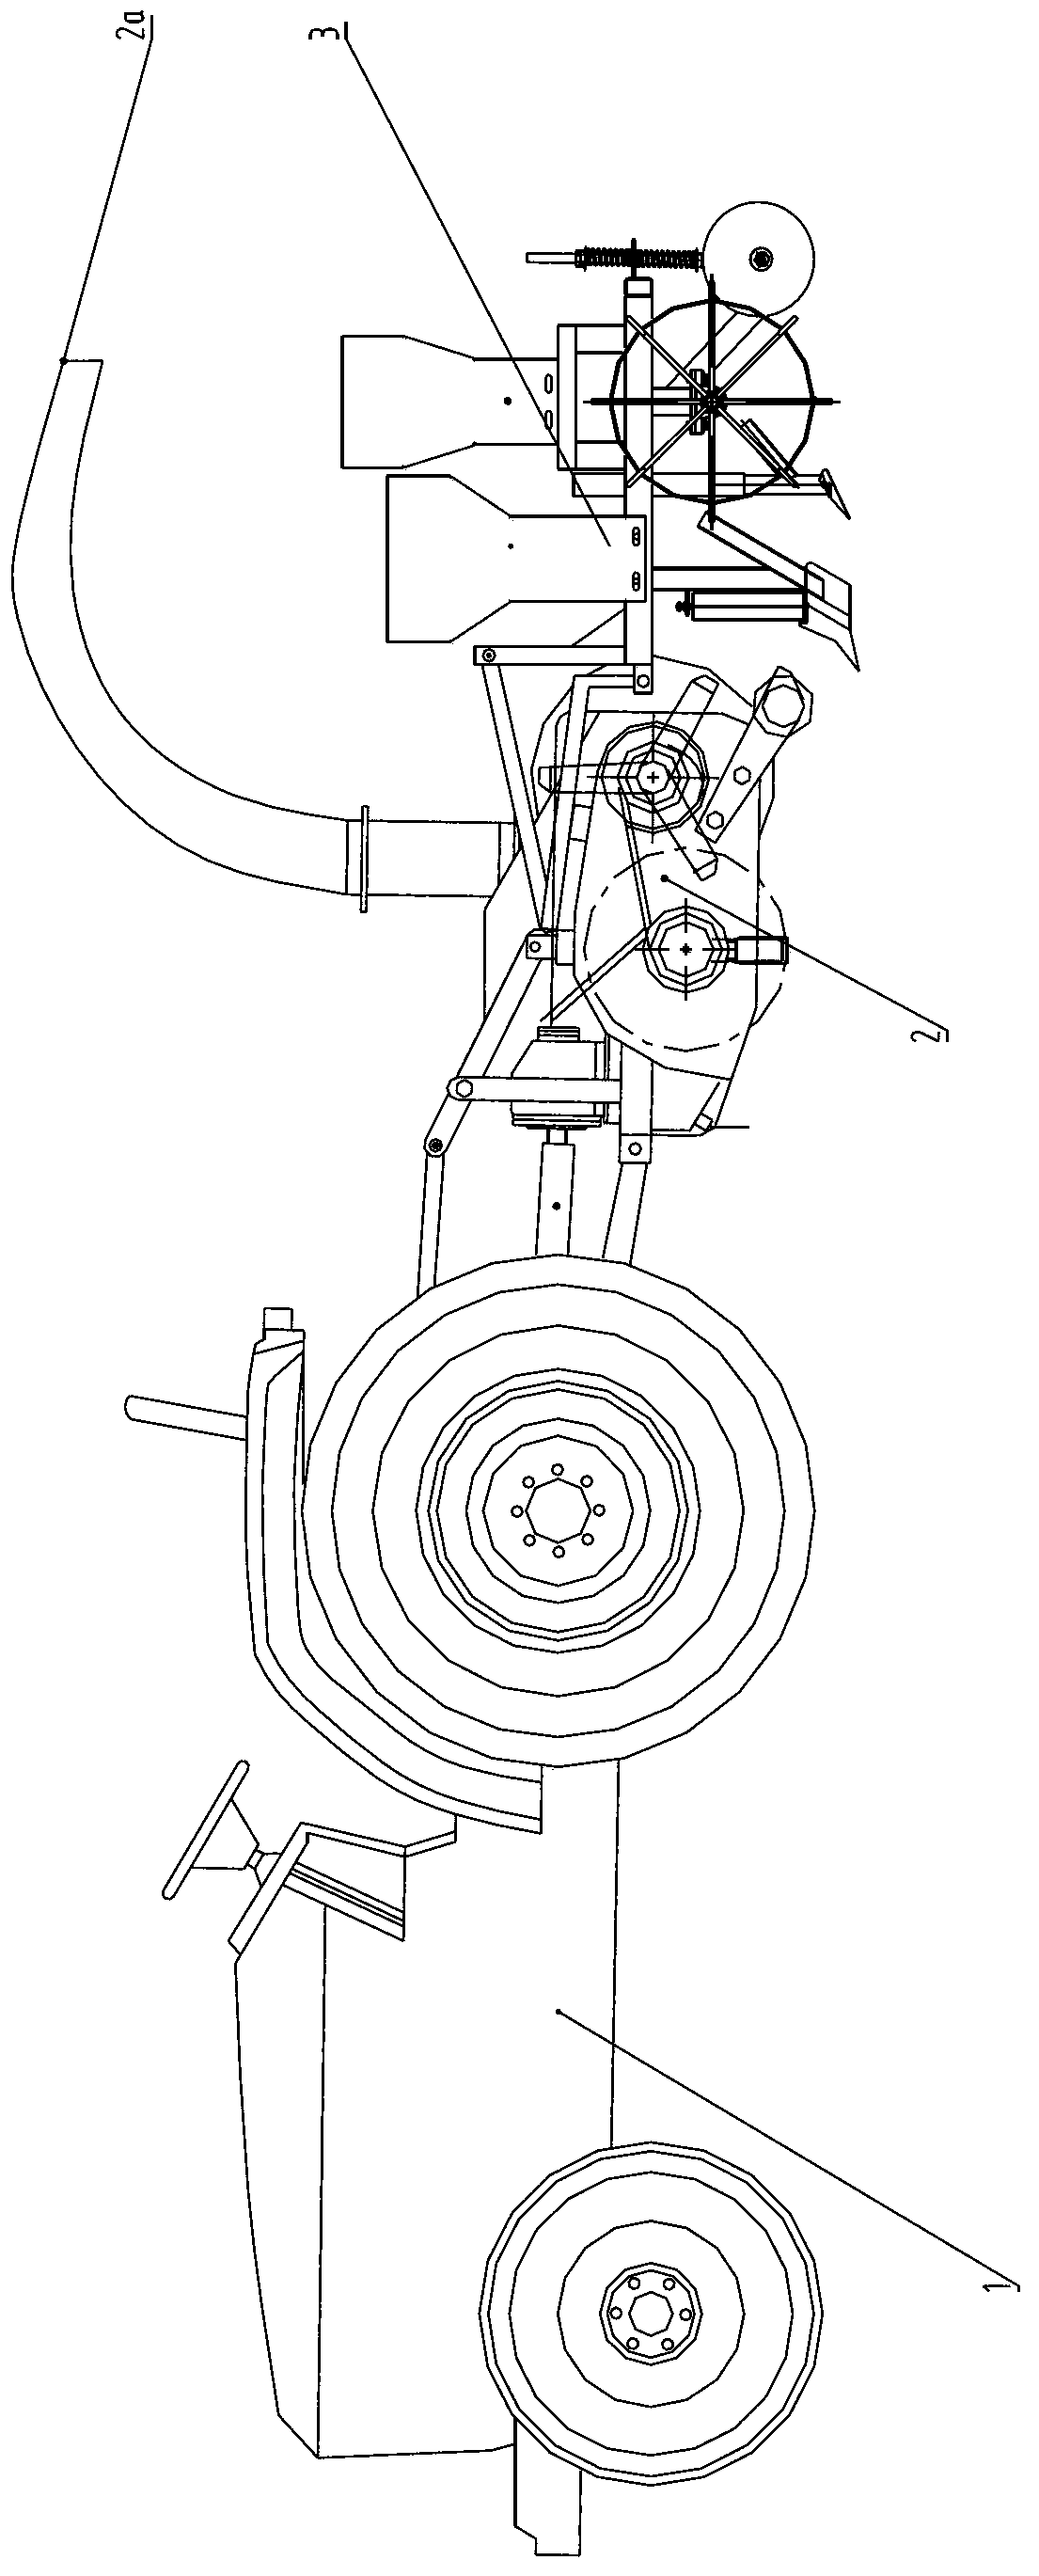 Improved straw outlet device of machine capable of crushing straw, applying fertilizer, performing sowing and covering straw